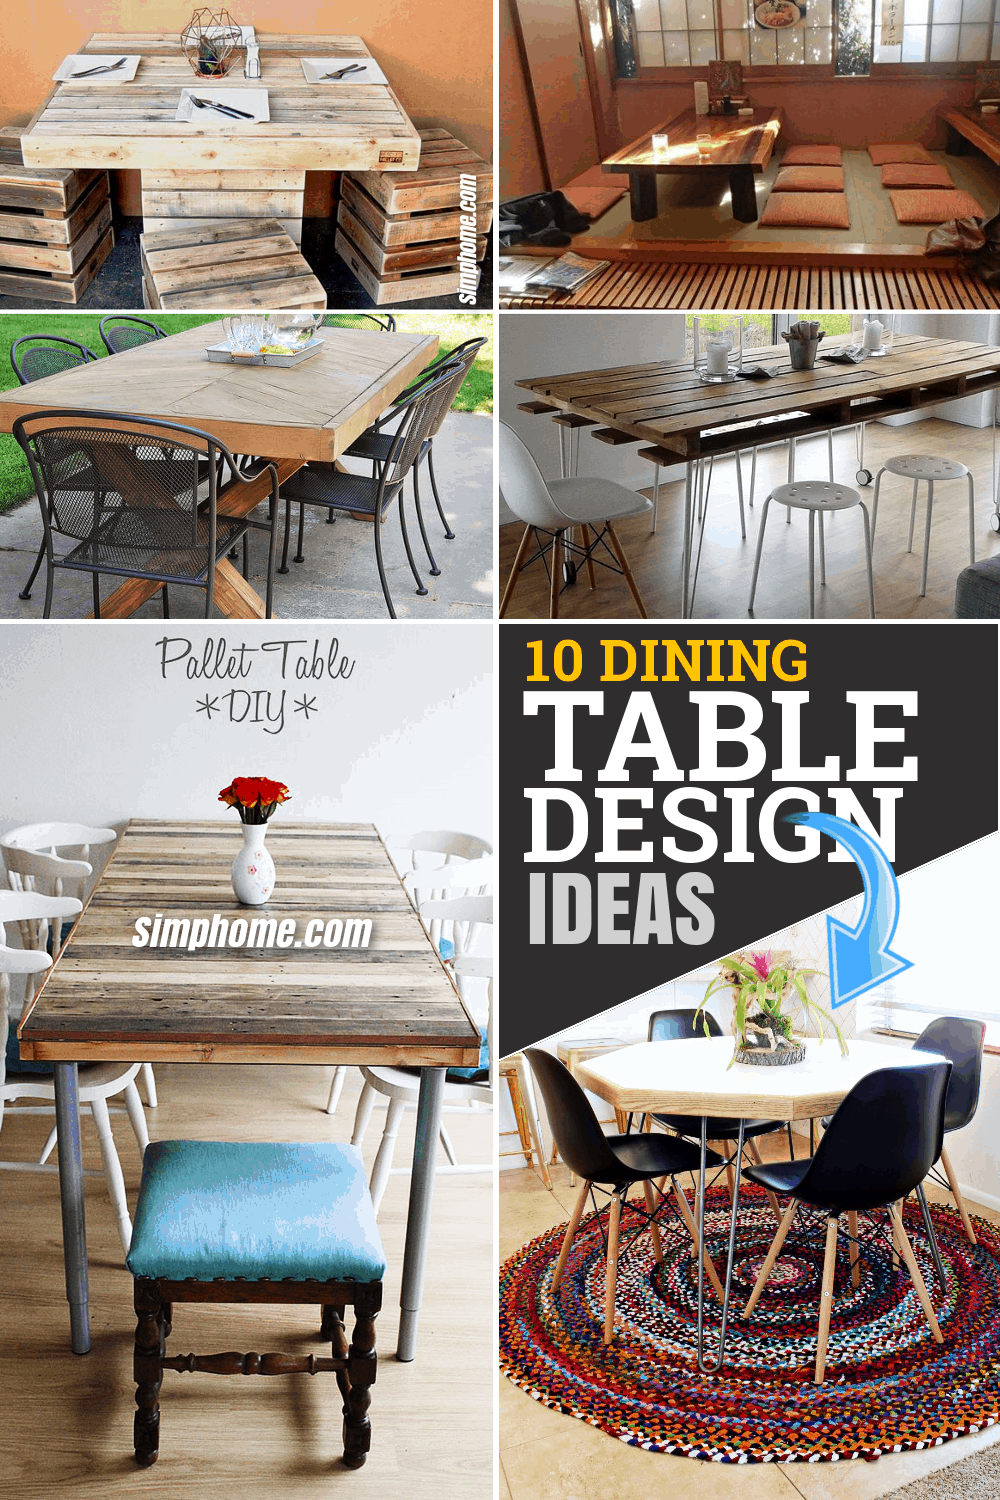 10 Dining Table Design Ideas You can Copy Easily via Simphome Featured Pinterest Image